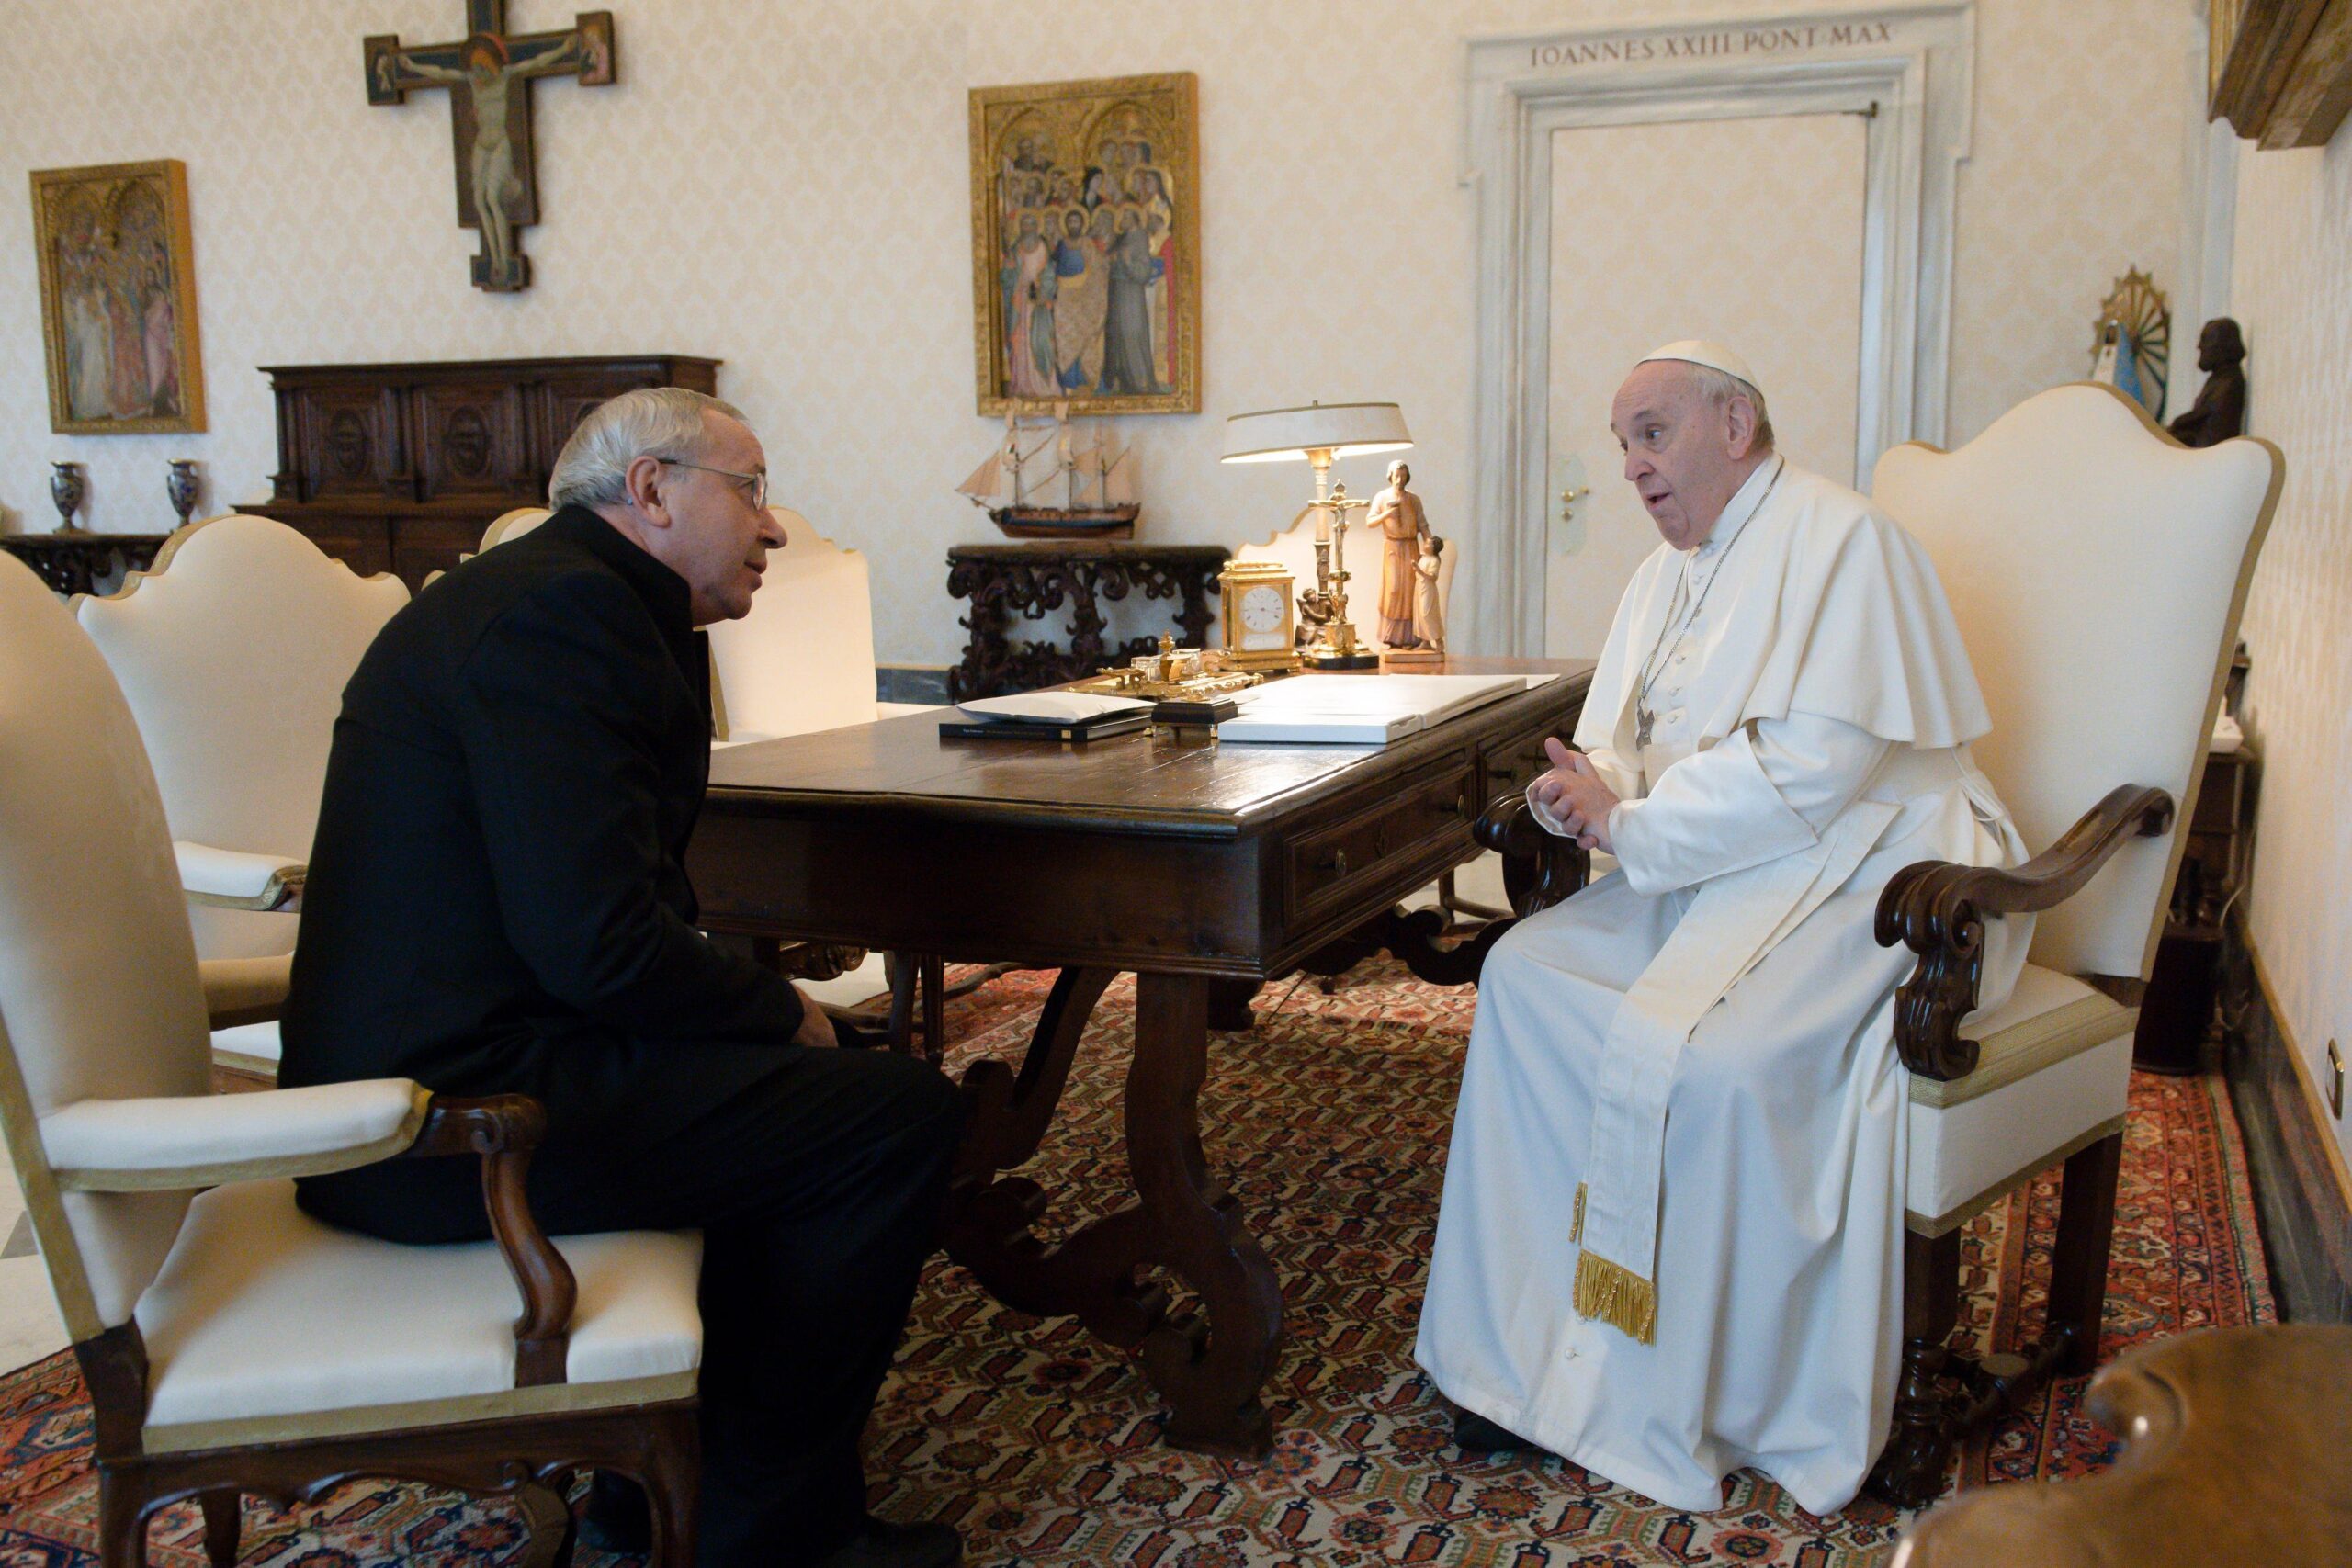 Pope Francis greets then-Jesuit Father Marko Rupnik during a private audience at the Vatican in this Jan. 3, 2022, file photo. Father Rupnik's expulsion from the Jesuits was confirmed July 24, 2023. (CNS photo/Vatican Media)